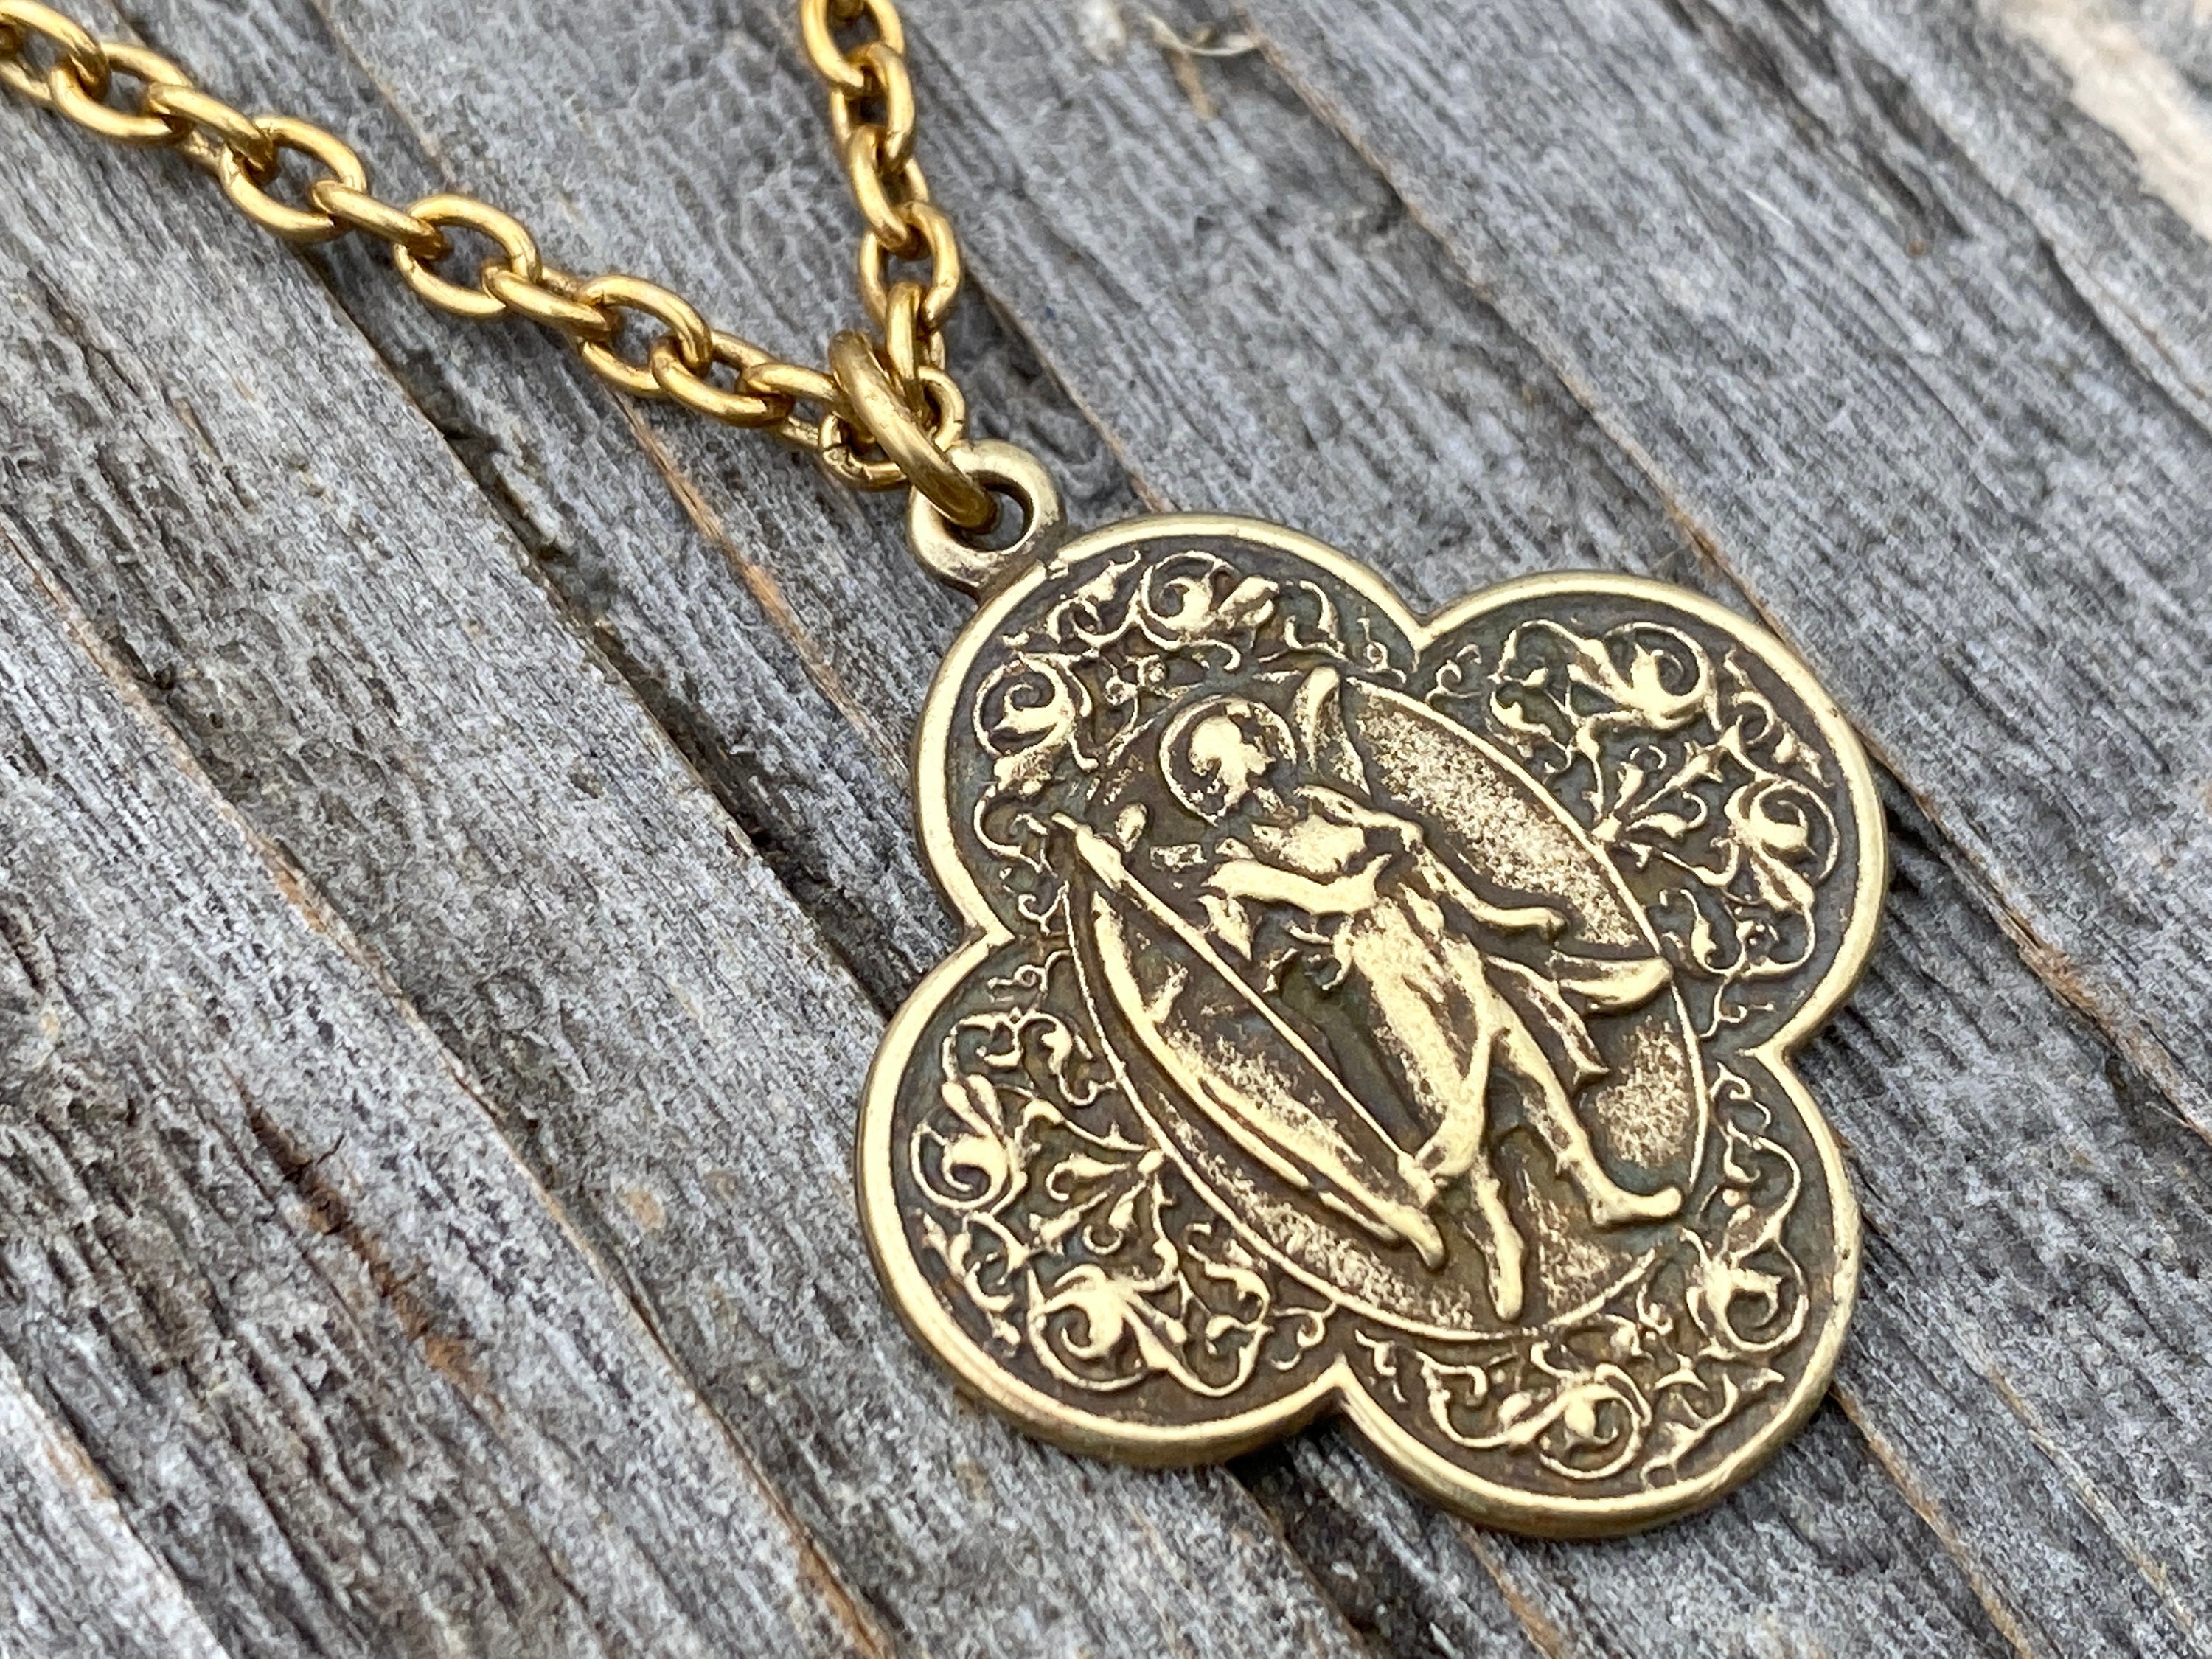 Antiqued Gold Miraculous Medal Pendant on Satellite Chain Necklace